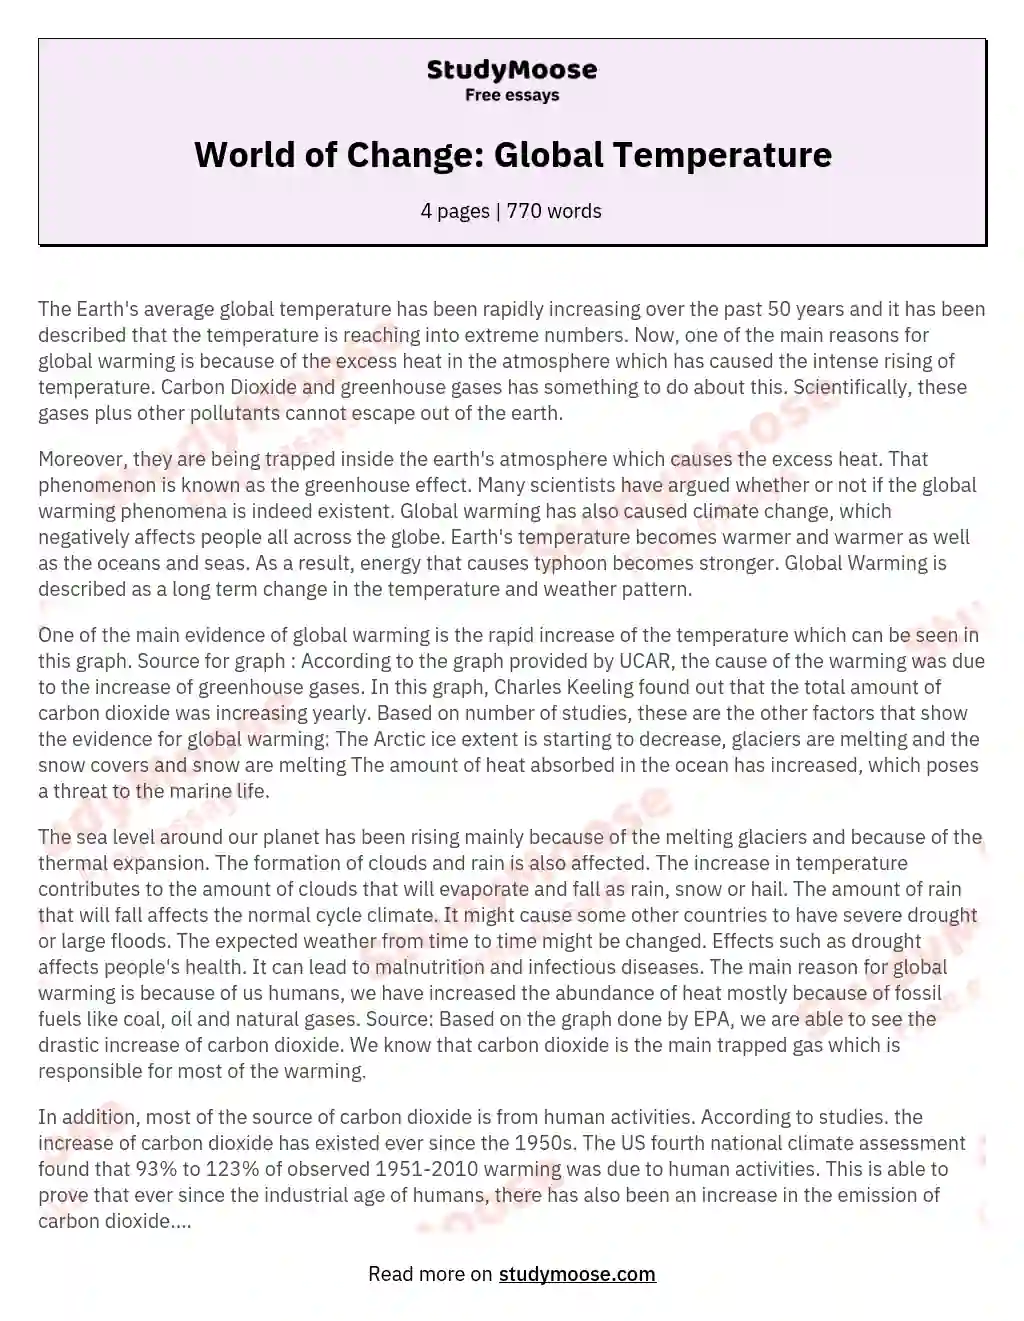 World of Change: Global Temperature essay